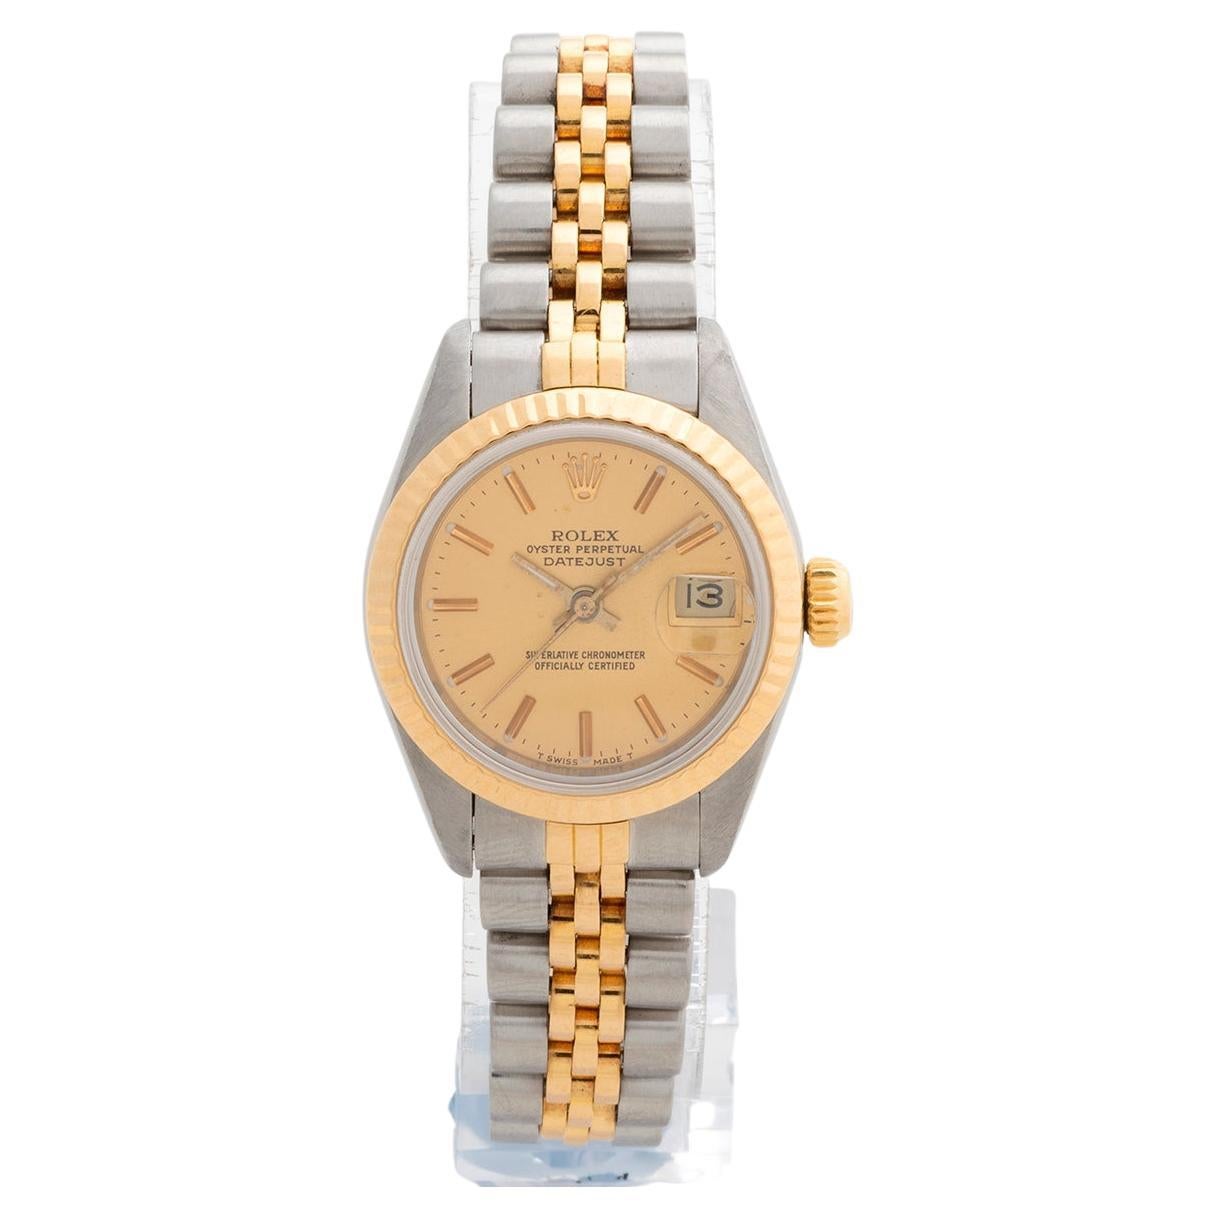 Our neo vintage ladies Rolex Datejust reference 69173 features a stainless steel case (with fluted 18k yellow gold bezel), a lightly patinated champagne dial and 18k yellow gold and stainless steel jubilee bracelet. We date production of this lady